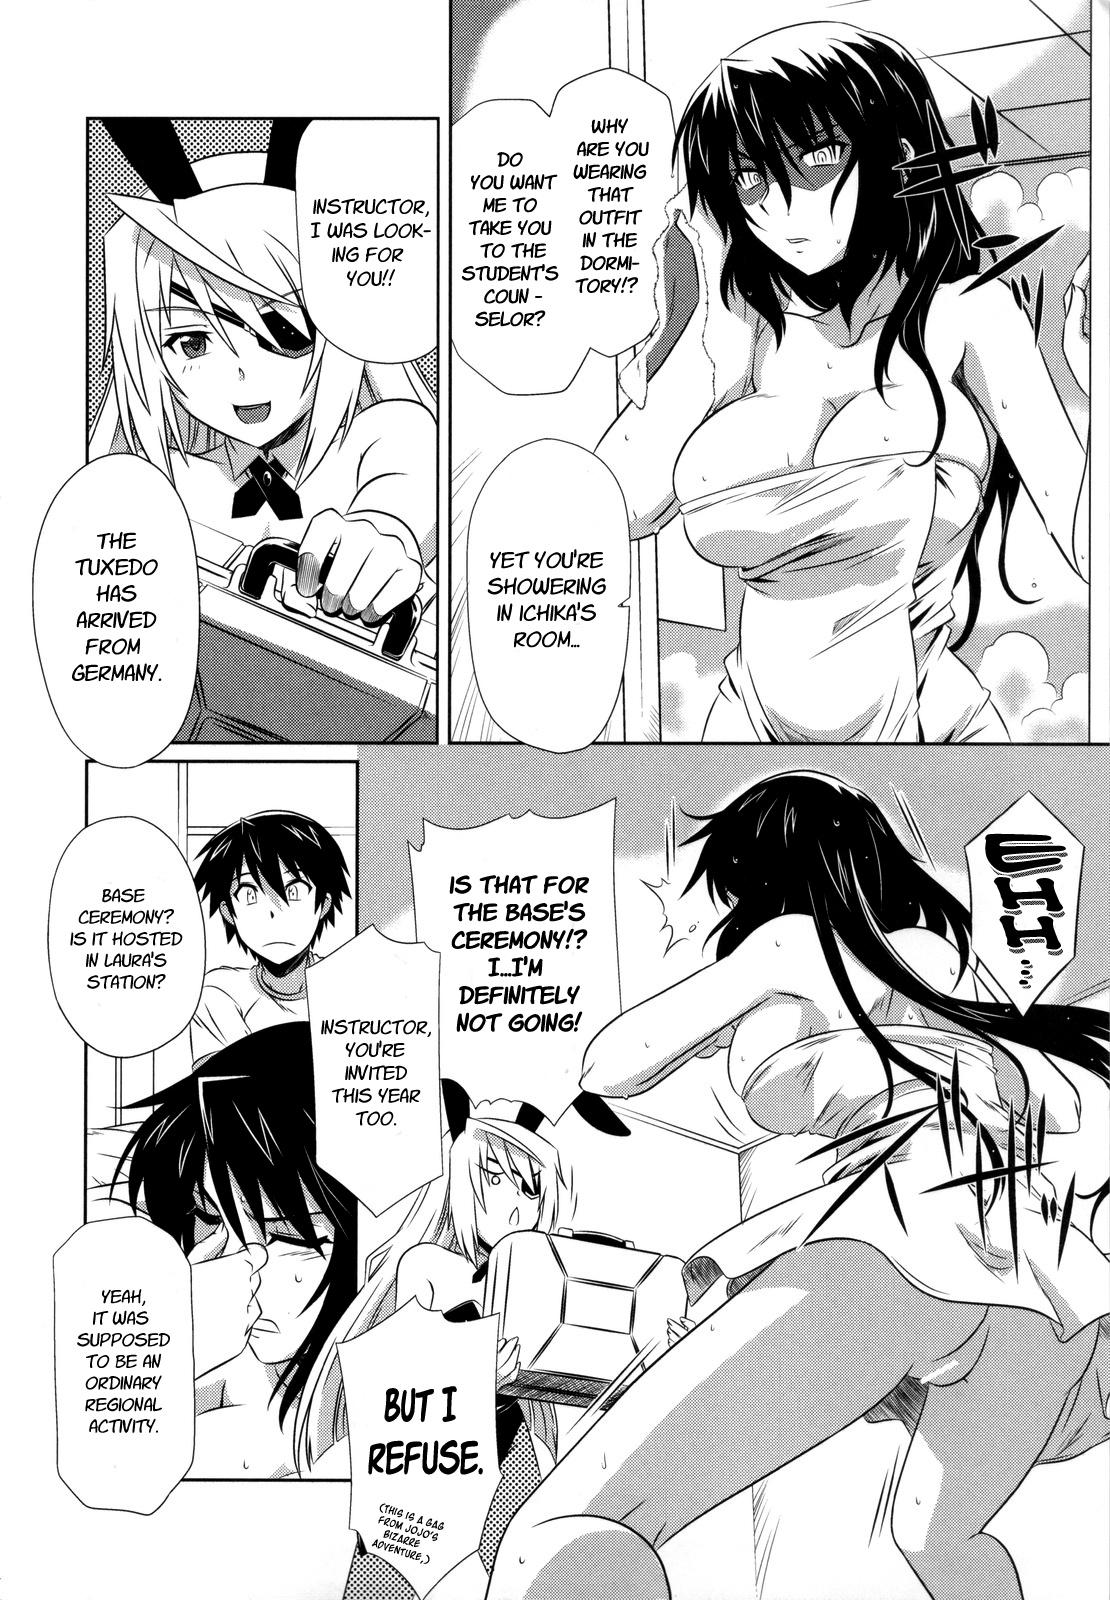 Roludo is Incest Strategy 3 - Infinite stratos Strapon - Page 3